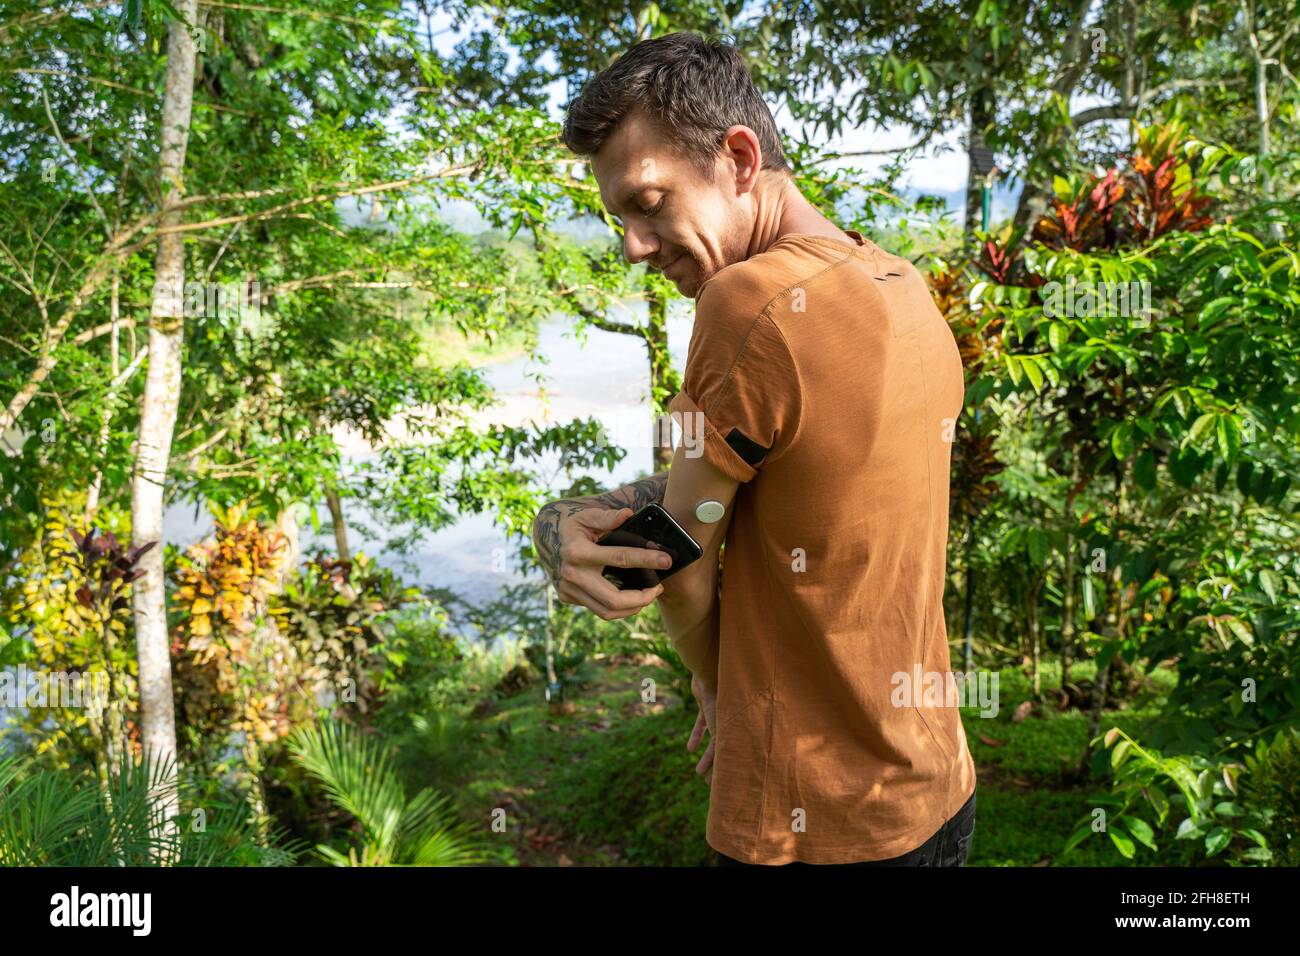 Young Man with Diabetic type 1 is measuring his blood sugar level with Abbott Freestyle Libre 2 sensor on the arm as he travels outdoor.Amazon rainfor Stock Photo